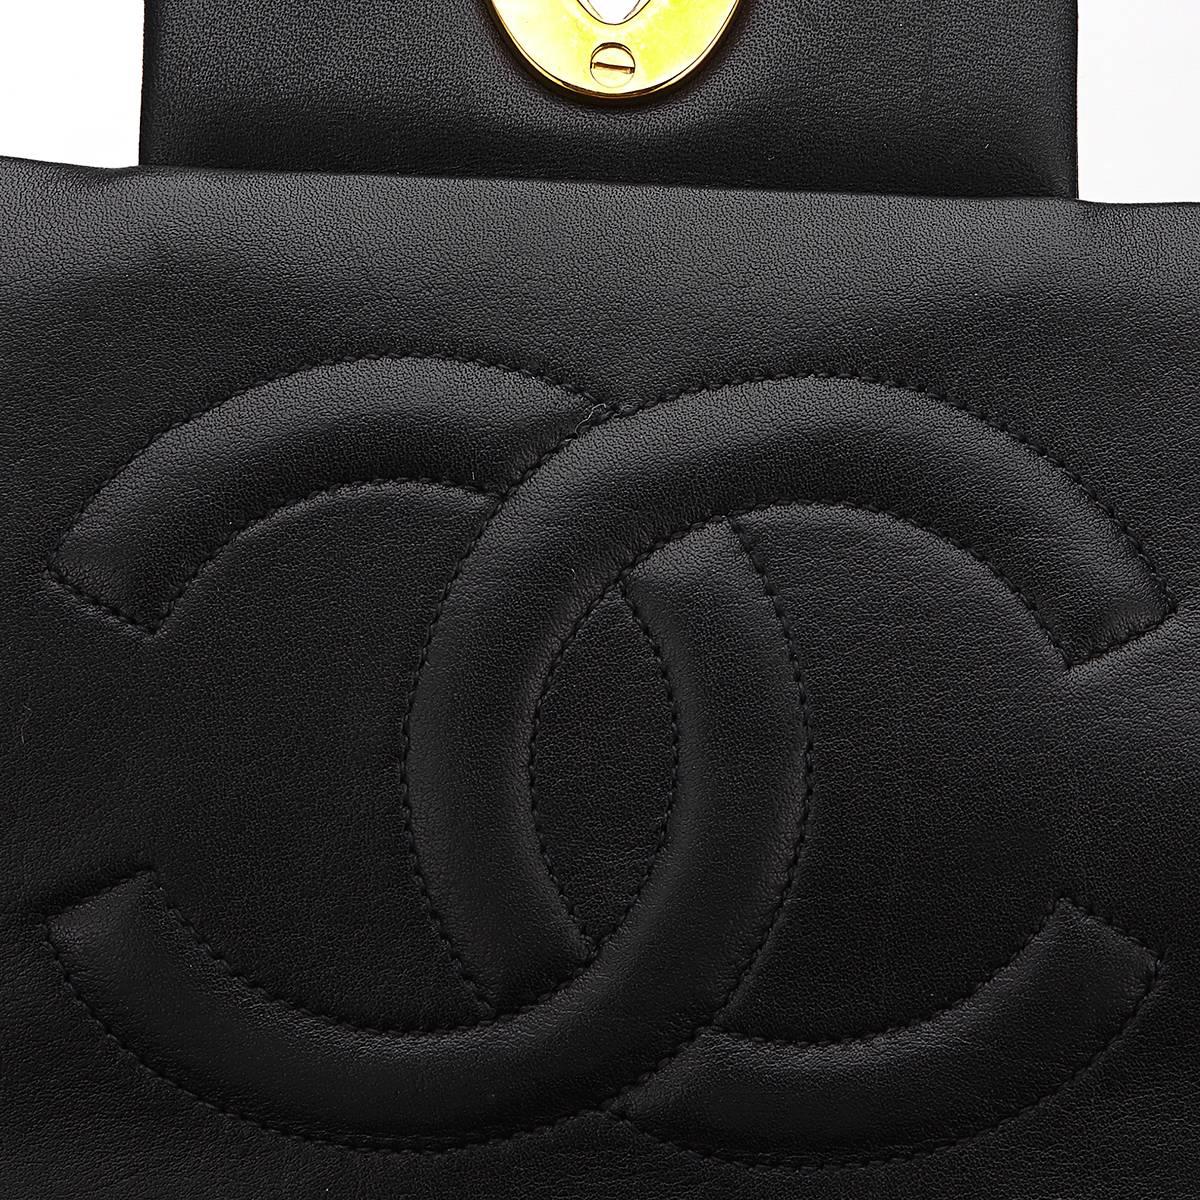 1990s Chanel Black Quilted Lambskin Vintage Maxi Jumbo XL Flap Bag 6